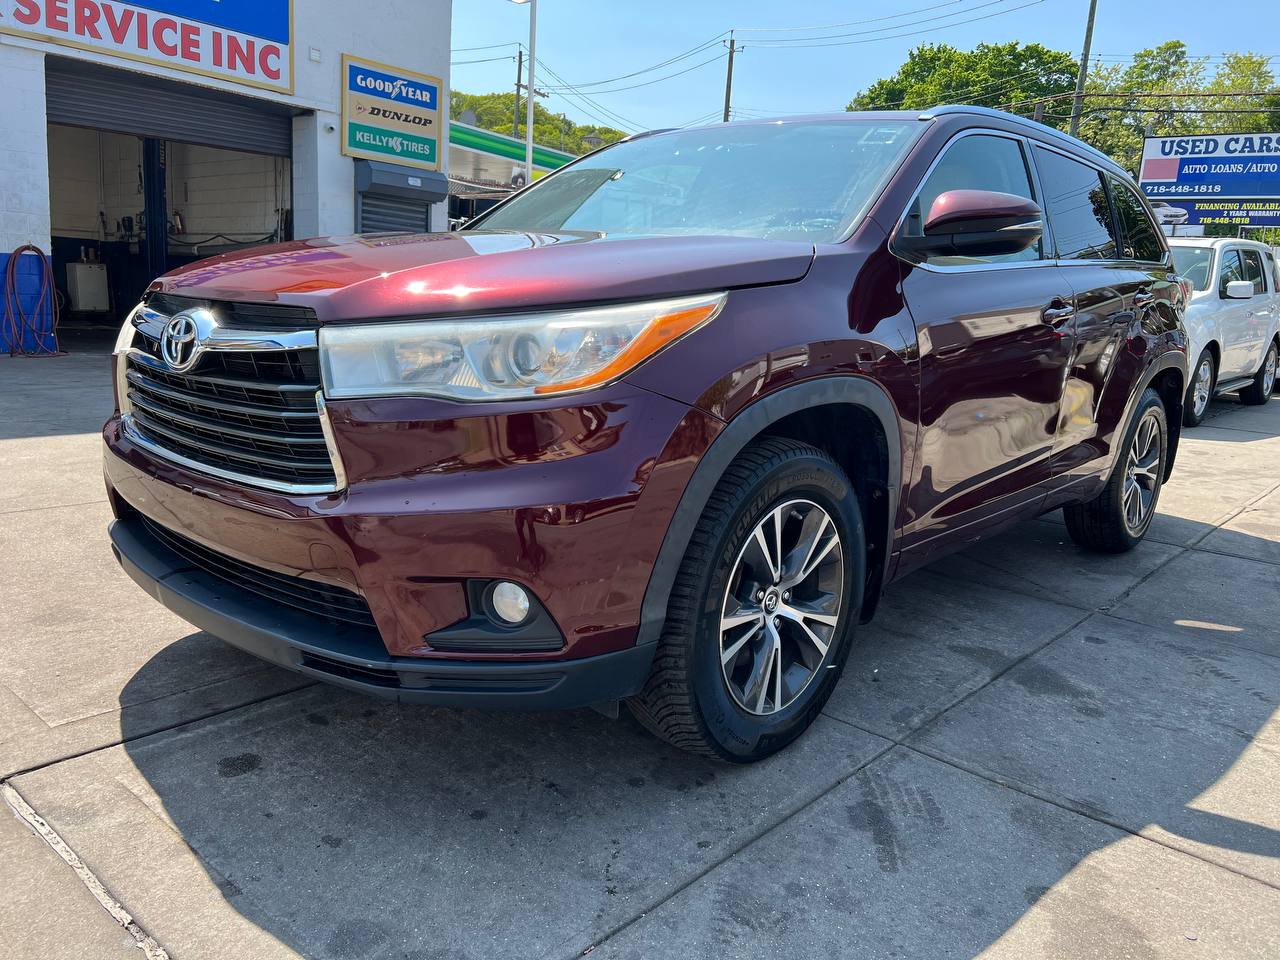 Used Car - 2016 Toyota Highlander XLE for Sale in Staten Island, NY